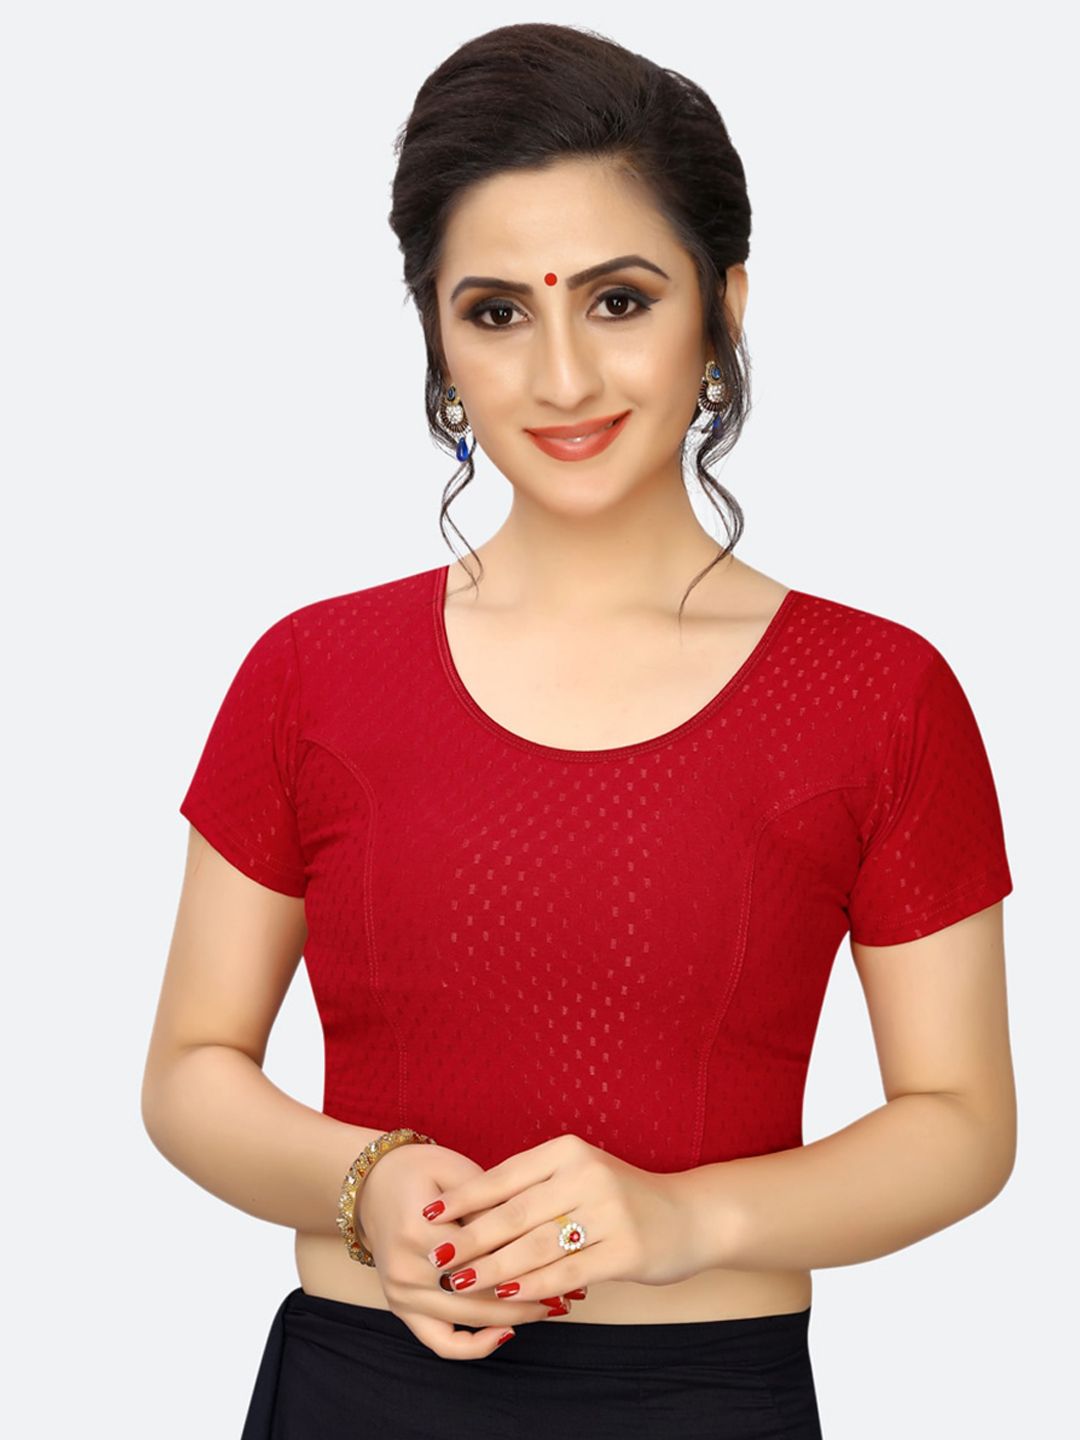 SIRIL Red Woven Design Stitch Saree Blouse Price in India